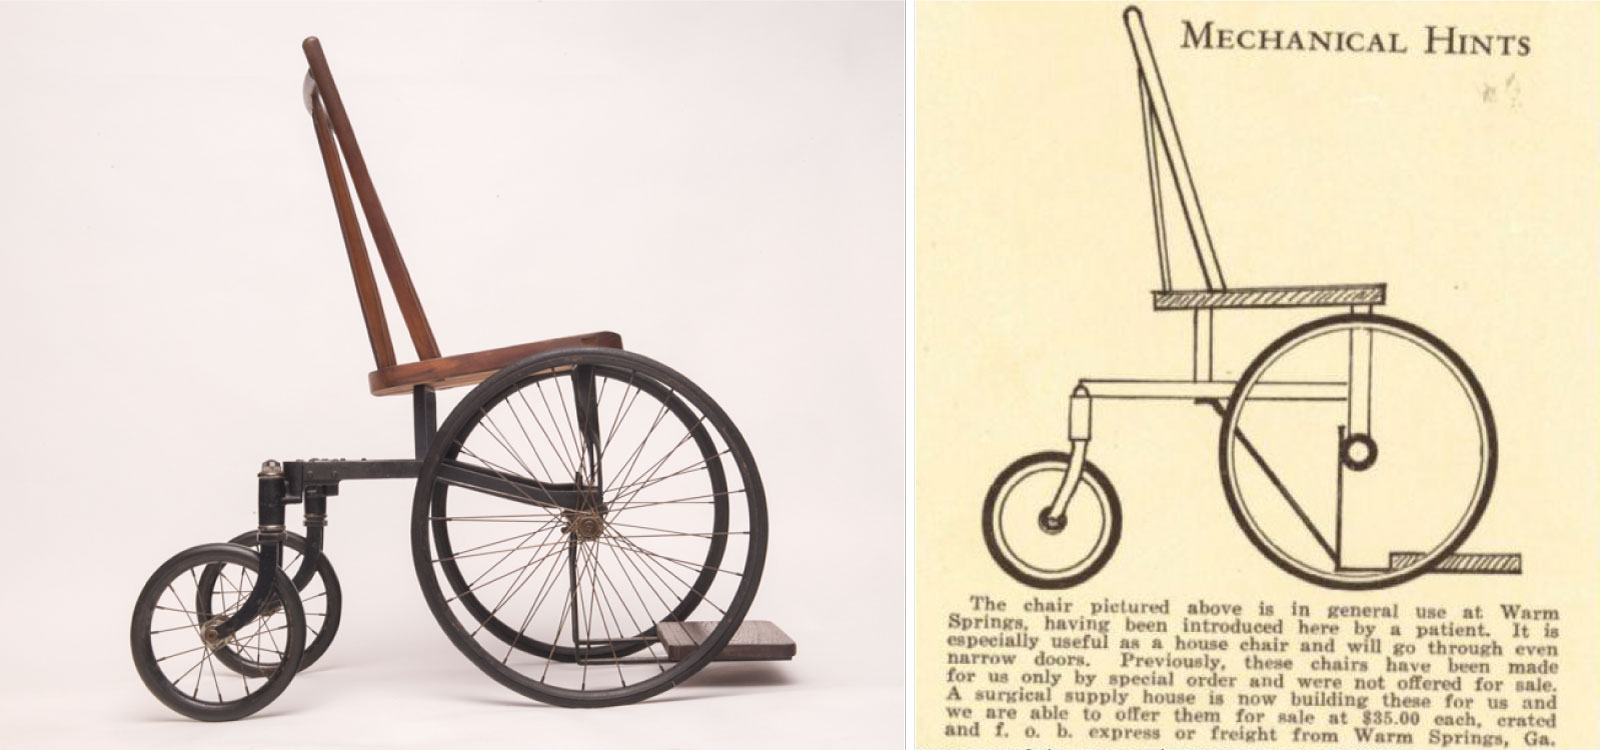 An image comparison between FDR's wheelchair and the advertisement for a Warm Springs wheelchair.